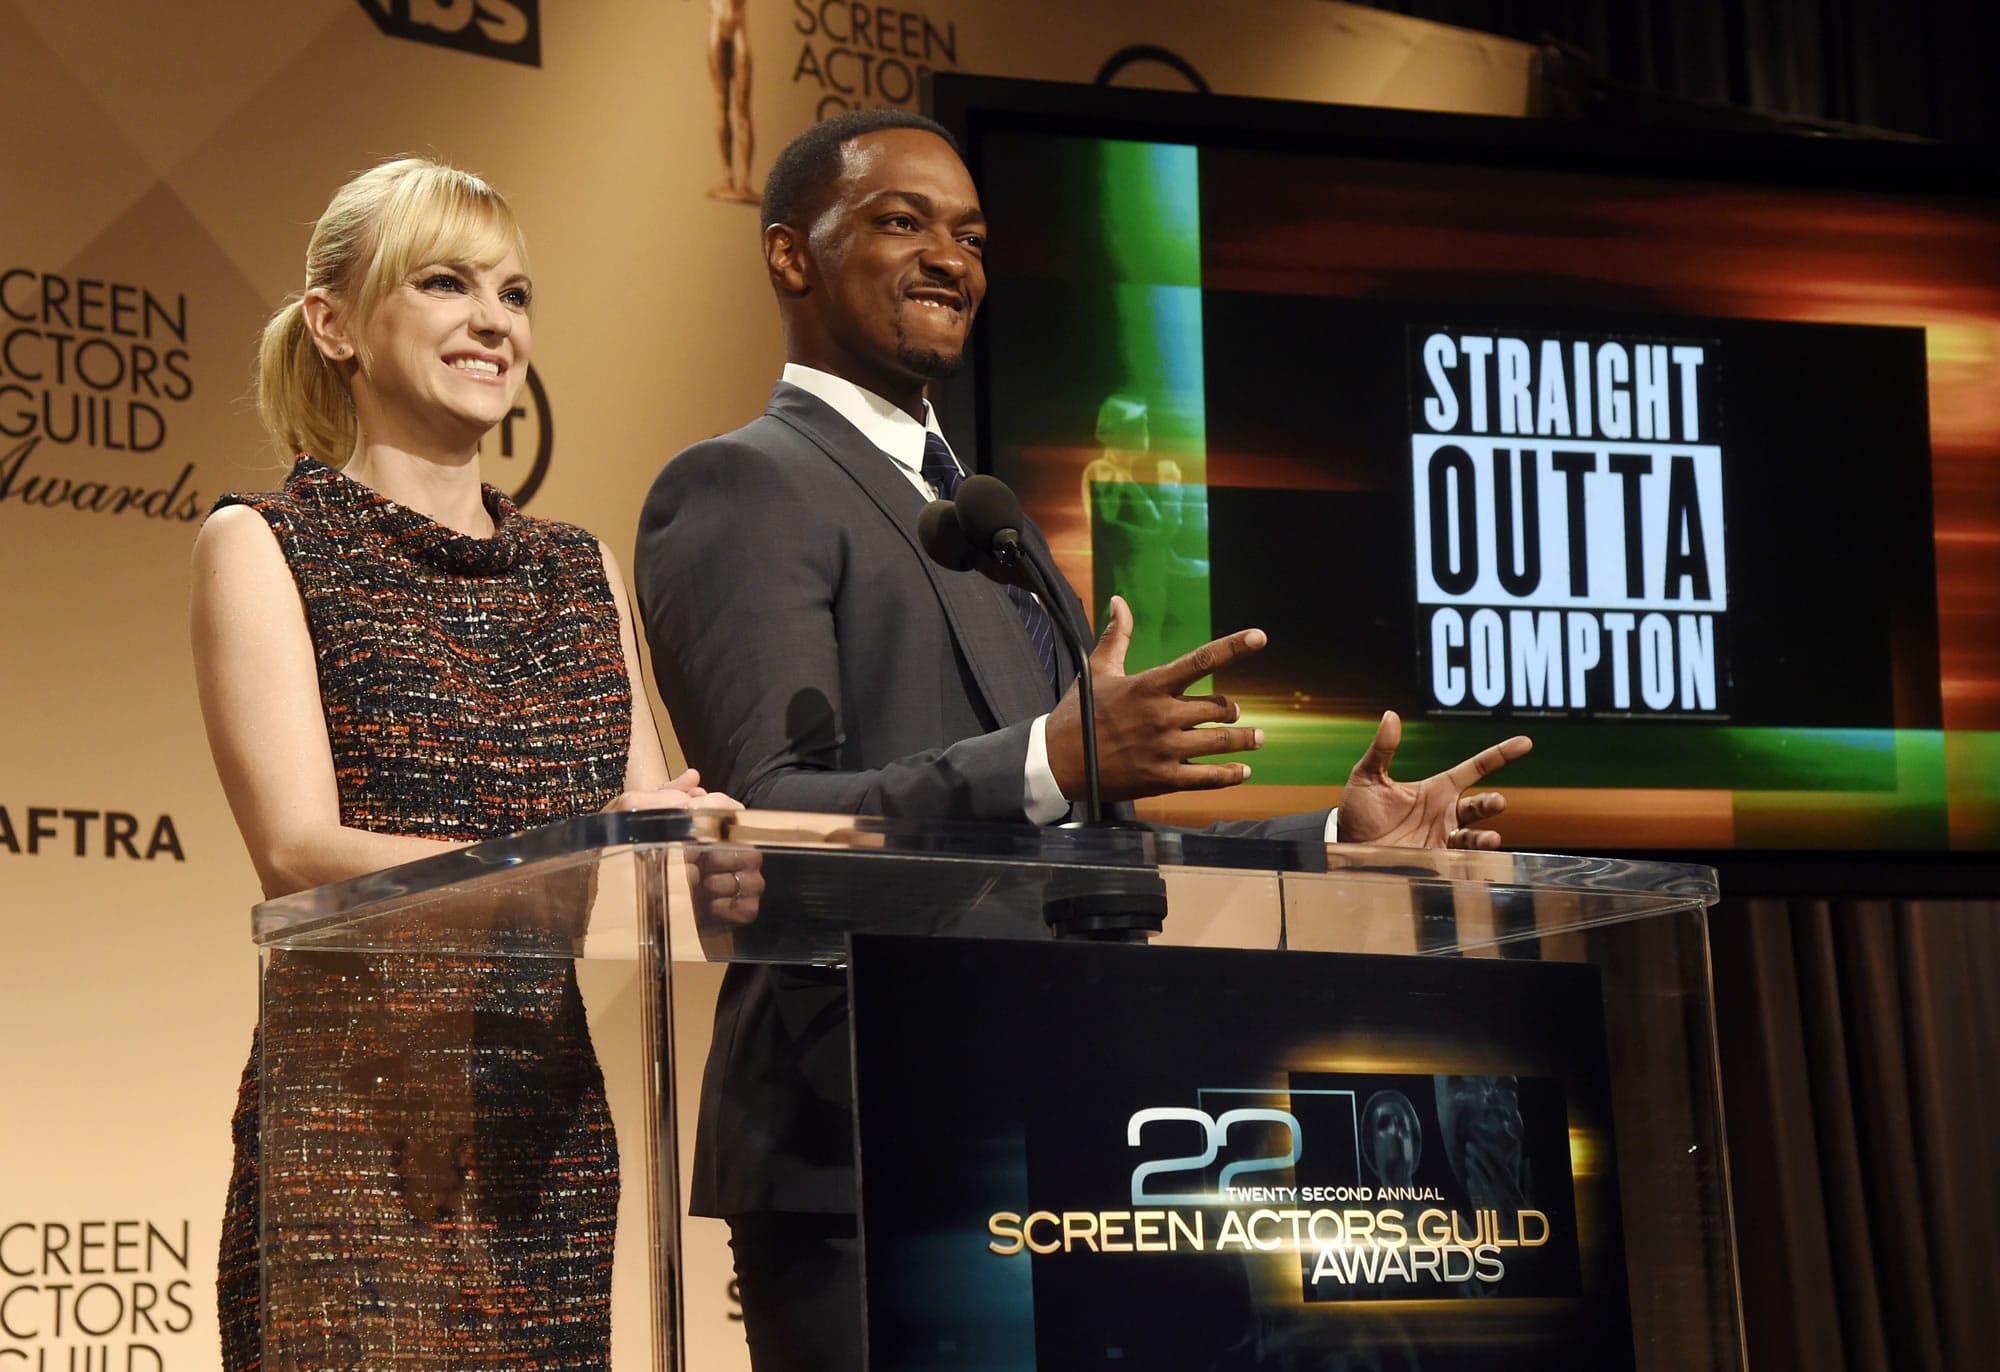 Actors Anna Faris, left, and Anthony Mackie announce the cast of &quot;Straight Outta Compton&quot; as nominees for Outstanding Performance by a Cast in a Motion Picture during the nominations for the 22nd Annual Screen Actors Guild Awards on Wednesday in West Hollywood, Calif. The show will be held on Jan. 30 in Los Angeles.